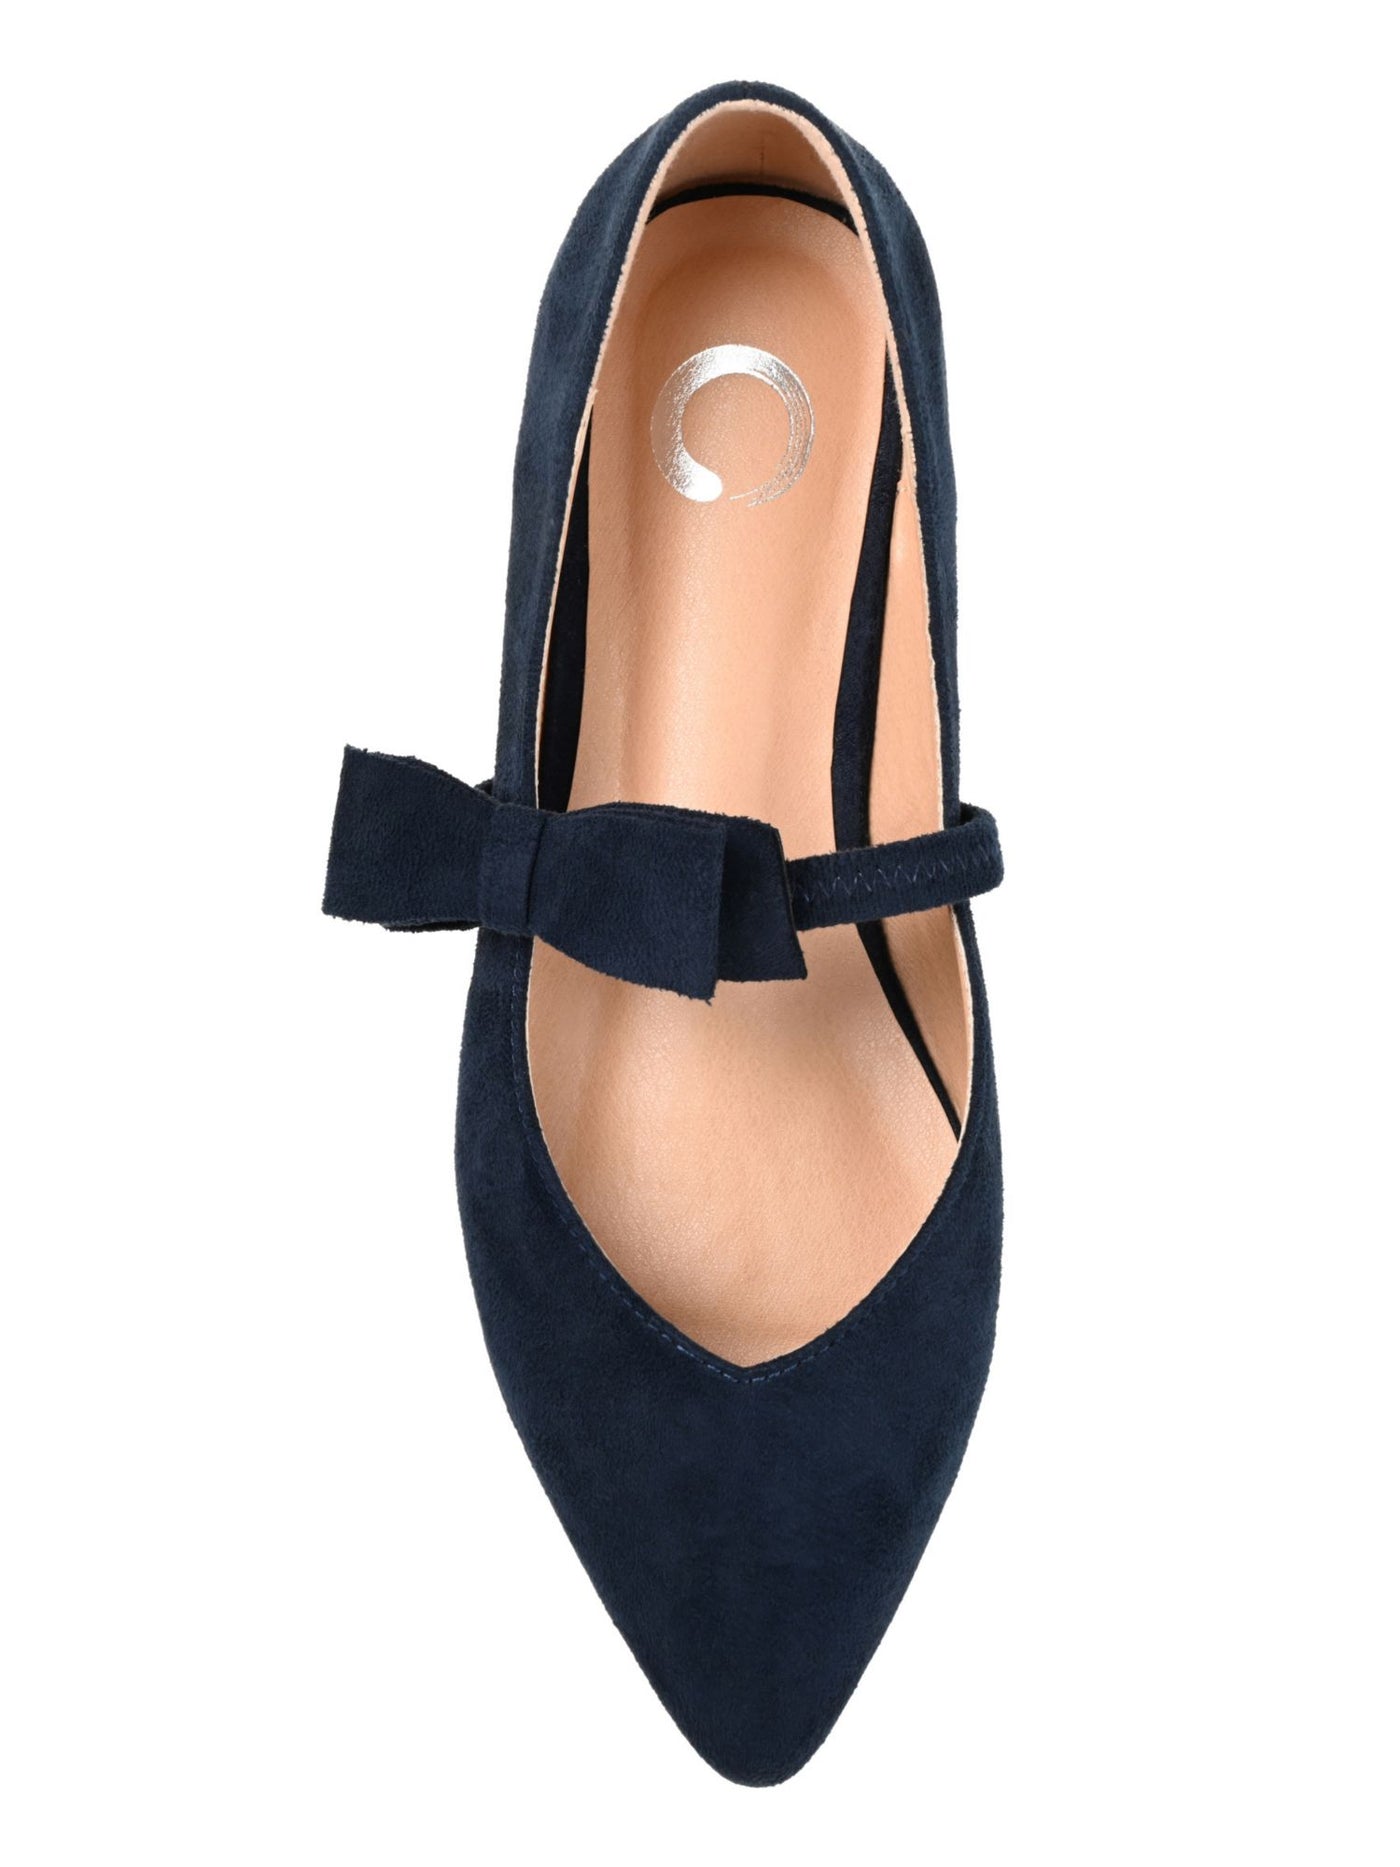 JOURNEE COLLECTION Womens Navy Bow Strap Mary Jane Goring Padded Aizlynn Pointed Toe Slip On Flats Shoes 7.5 M